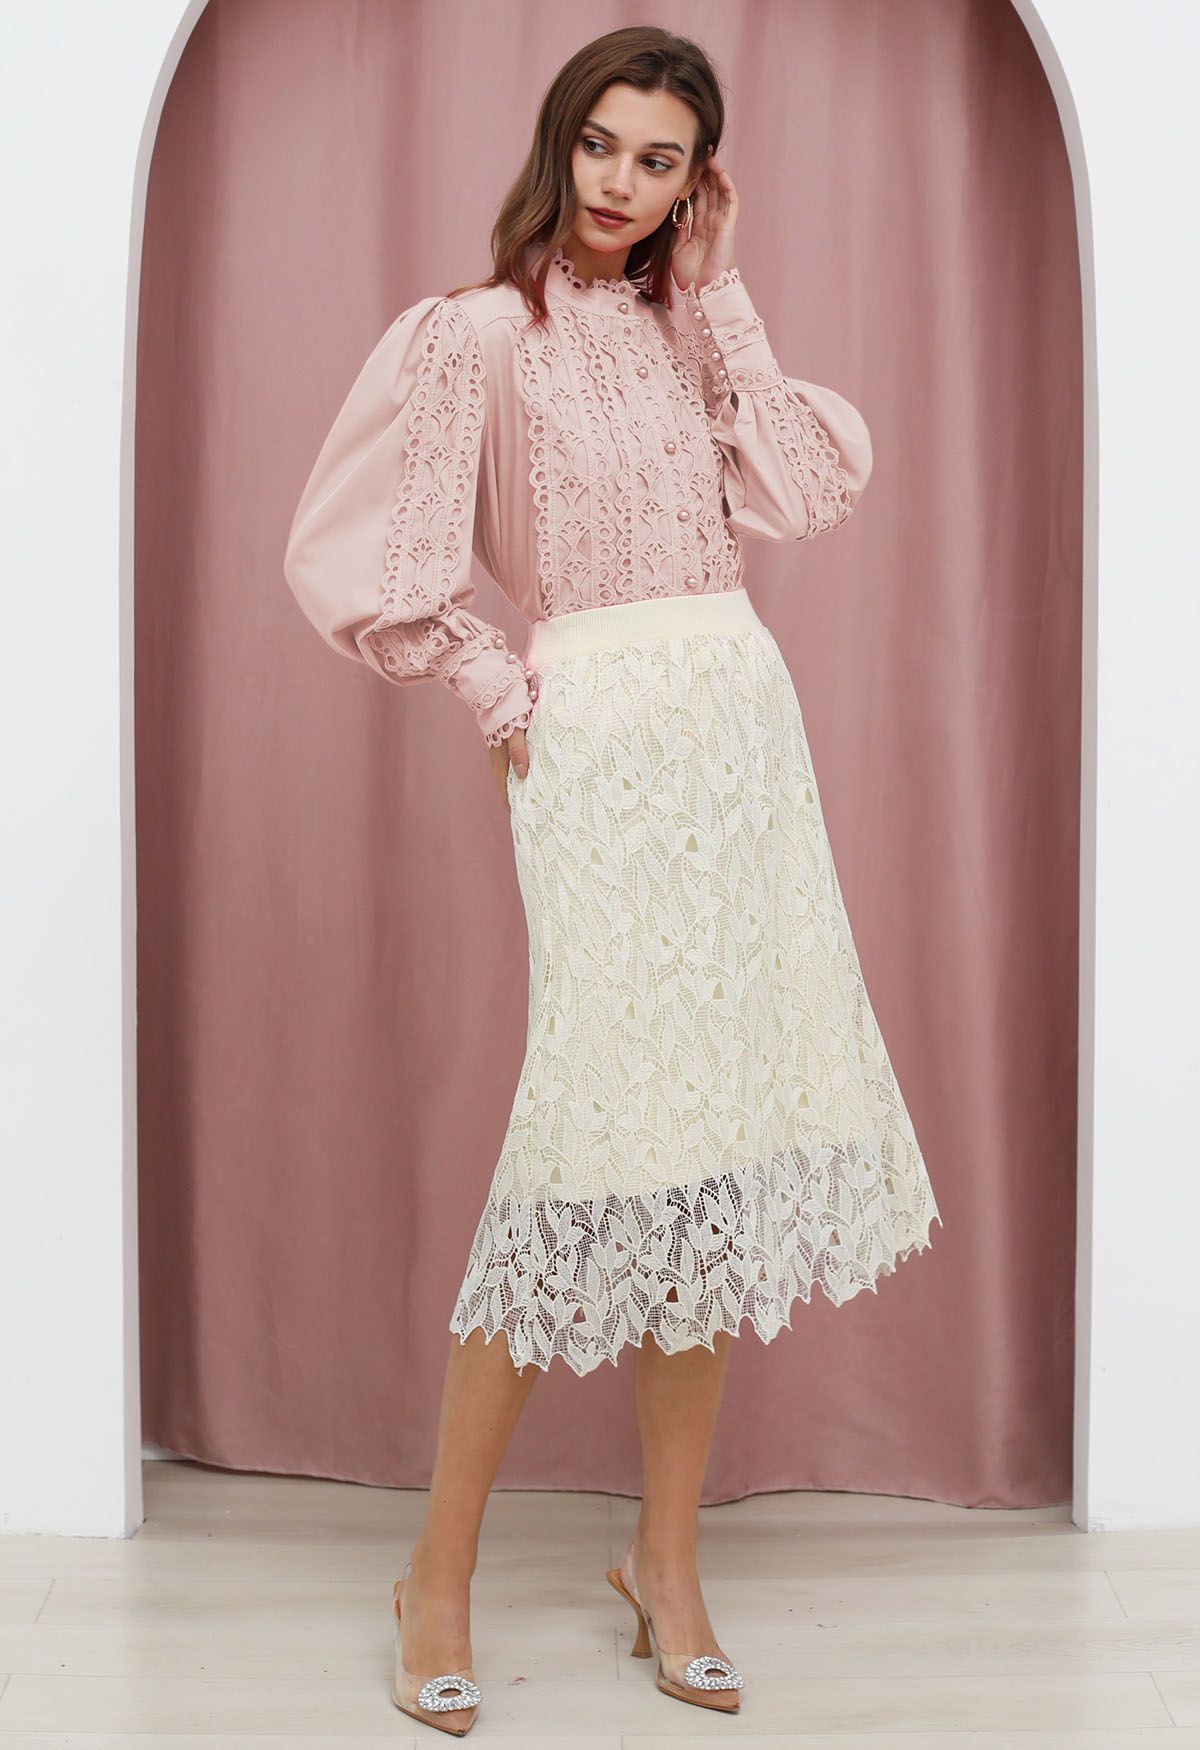 Exquisite Cutwork Bubble Sleeves Button-Up Shirt in Pink